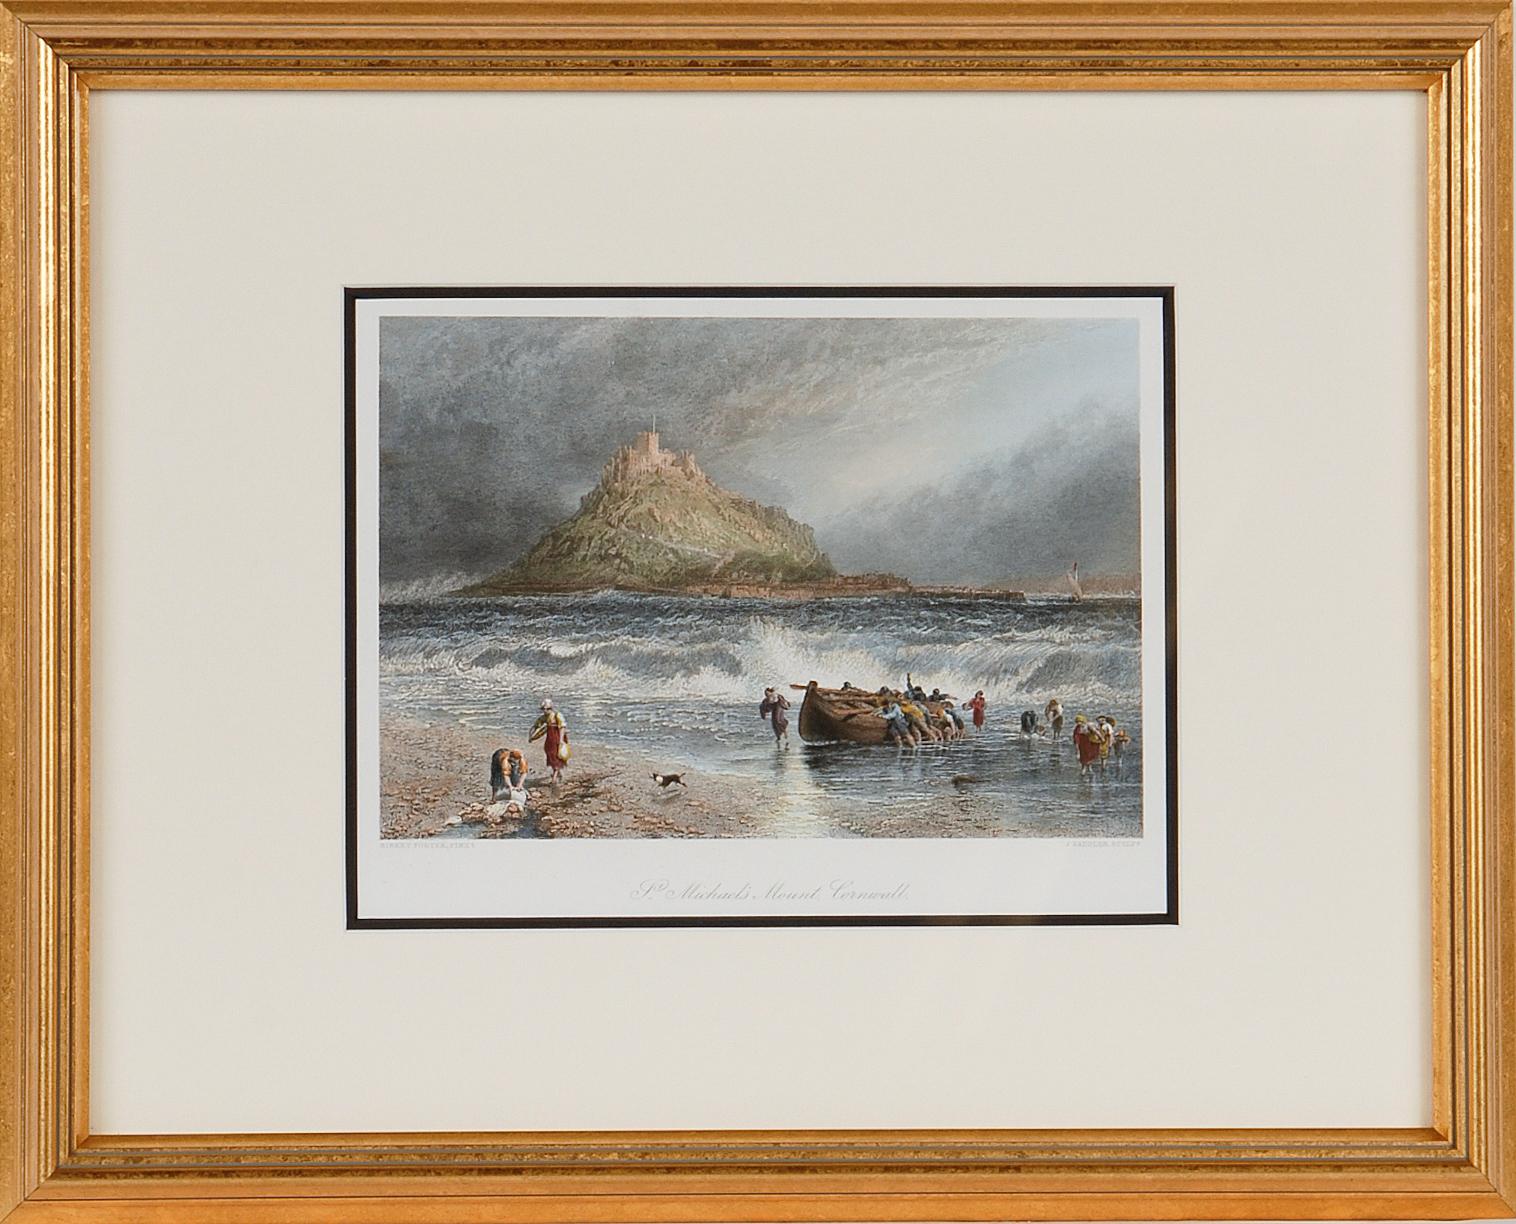 Myles Birket Foster Landscape Print - St. Michael's Mount, Cornwall: A Framed 19th C. Engraving After Myles Foster